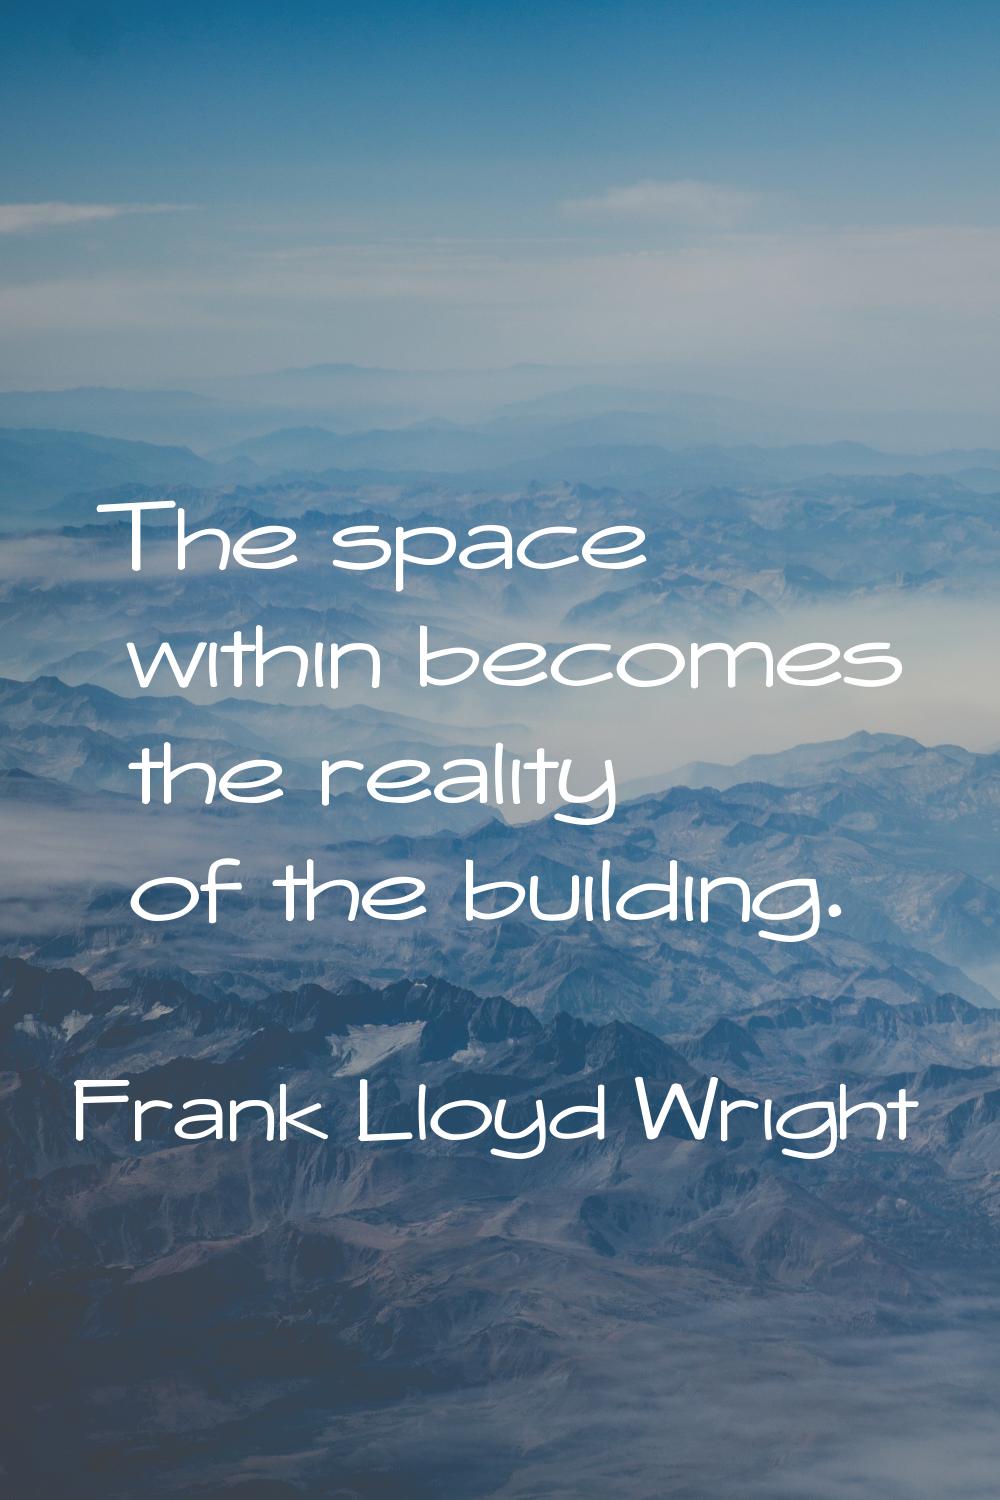 The space within becomes the reality of the building.